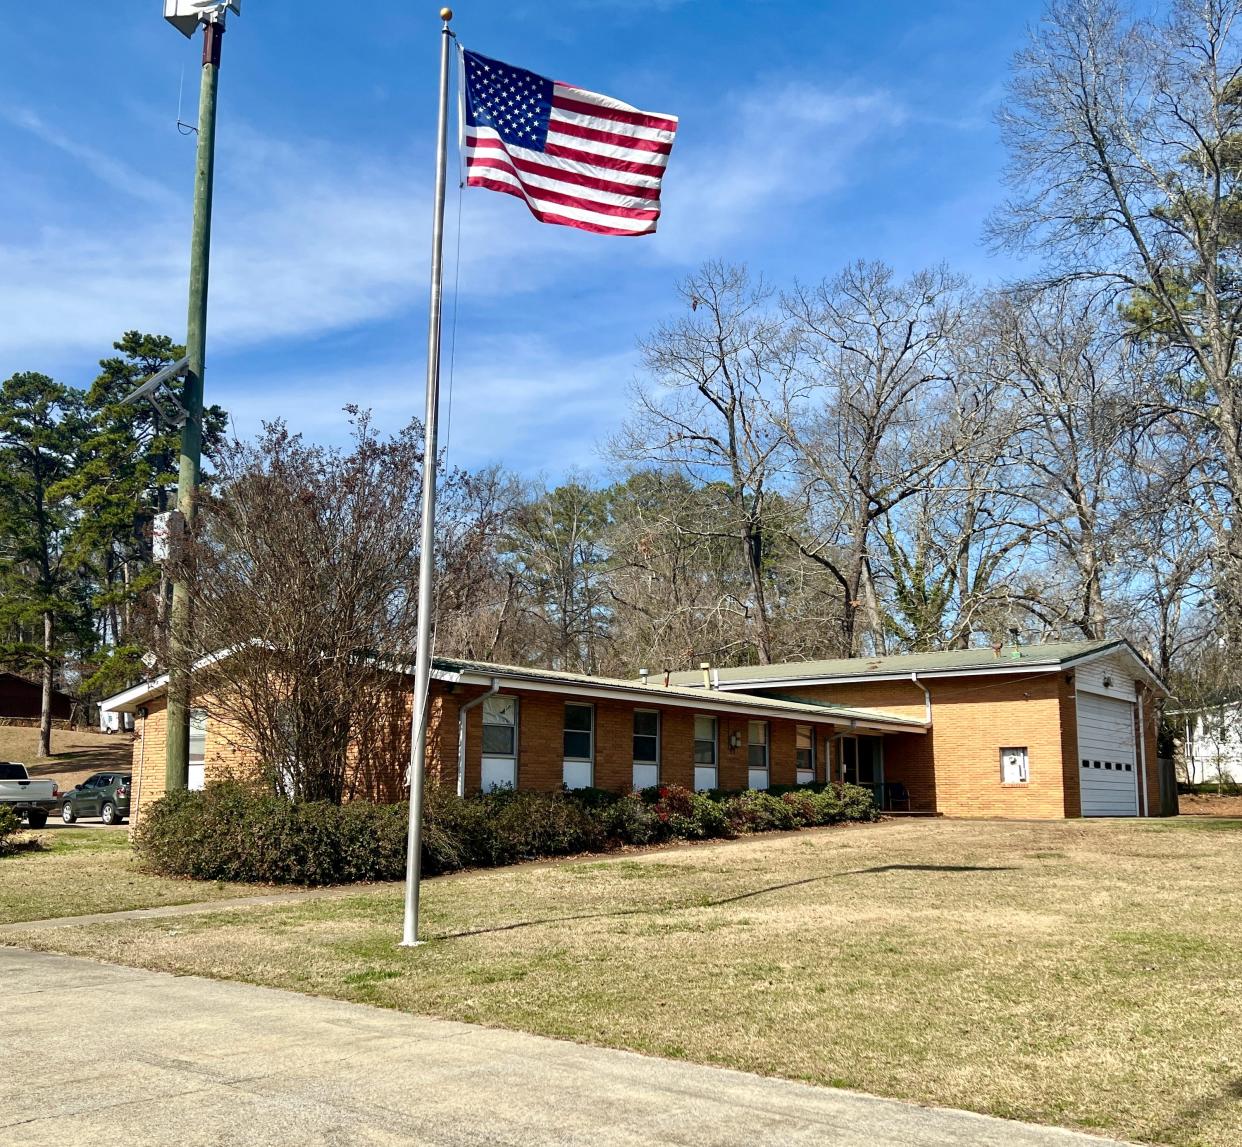 Fire Station 5 is one of the oldest fire stations in Gadsden. The city plans to build a new Fire Station 5 that will feature a log cabin-style facade, in keeping with Noccalula Park's motif, and include a new police sub-precinct.